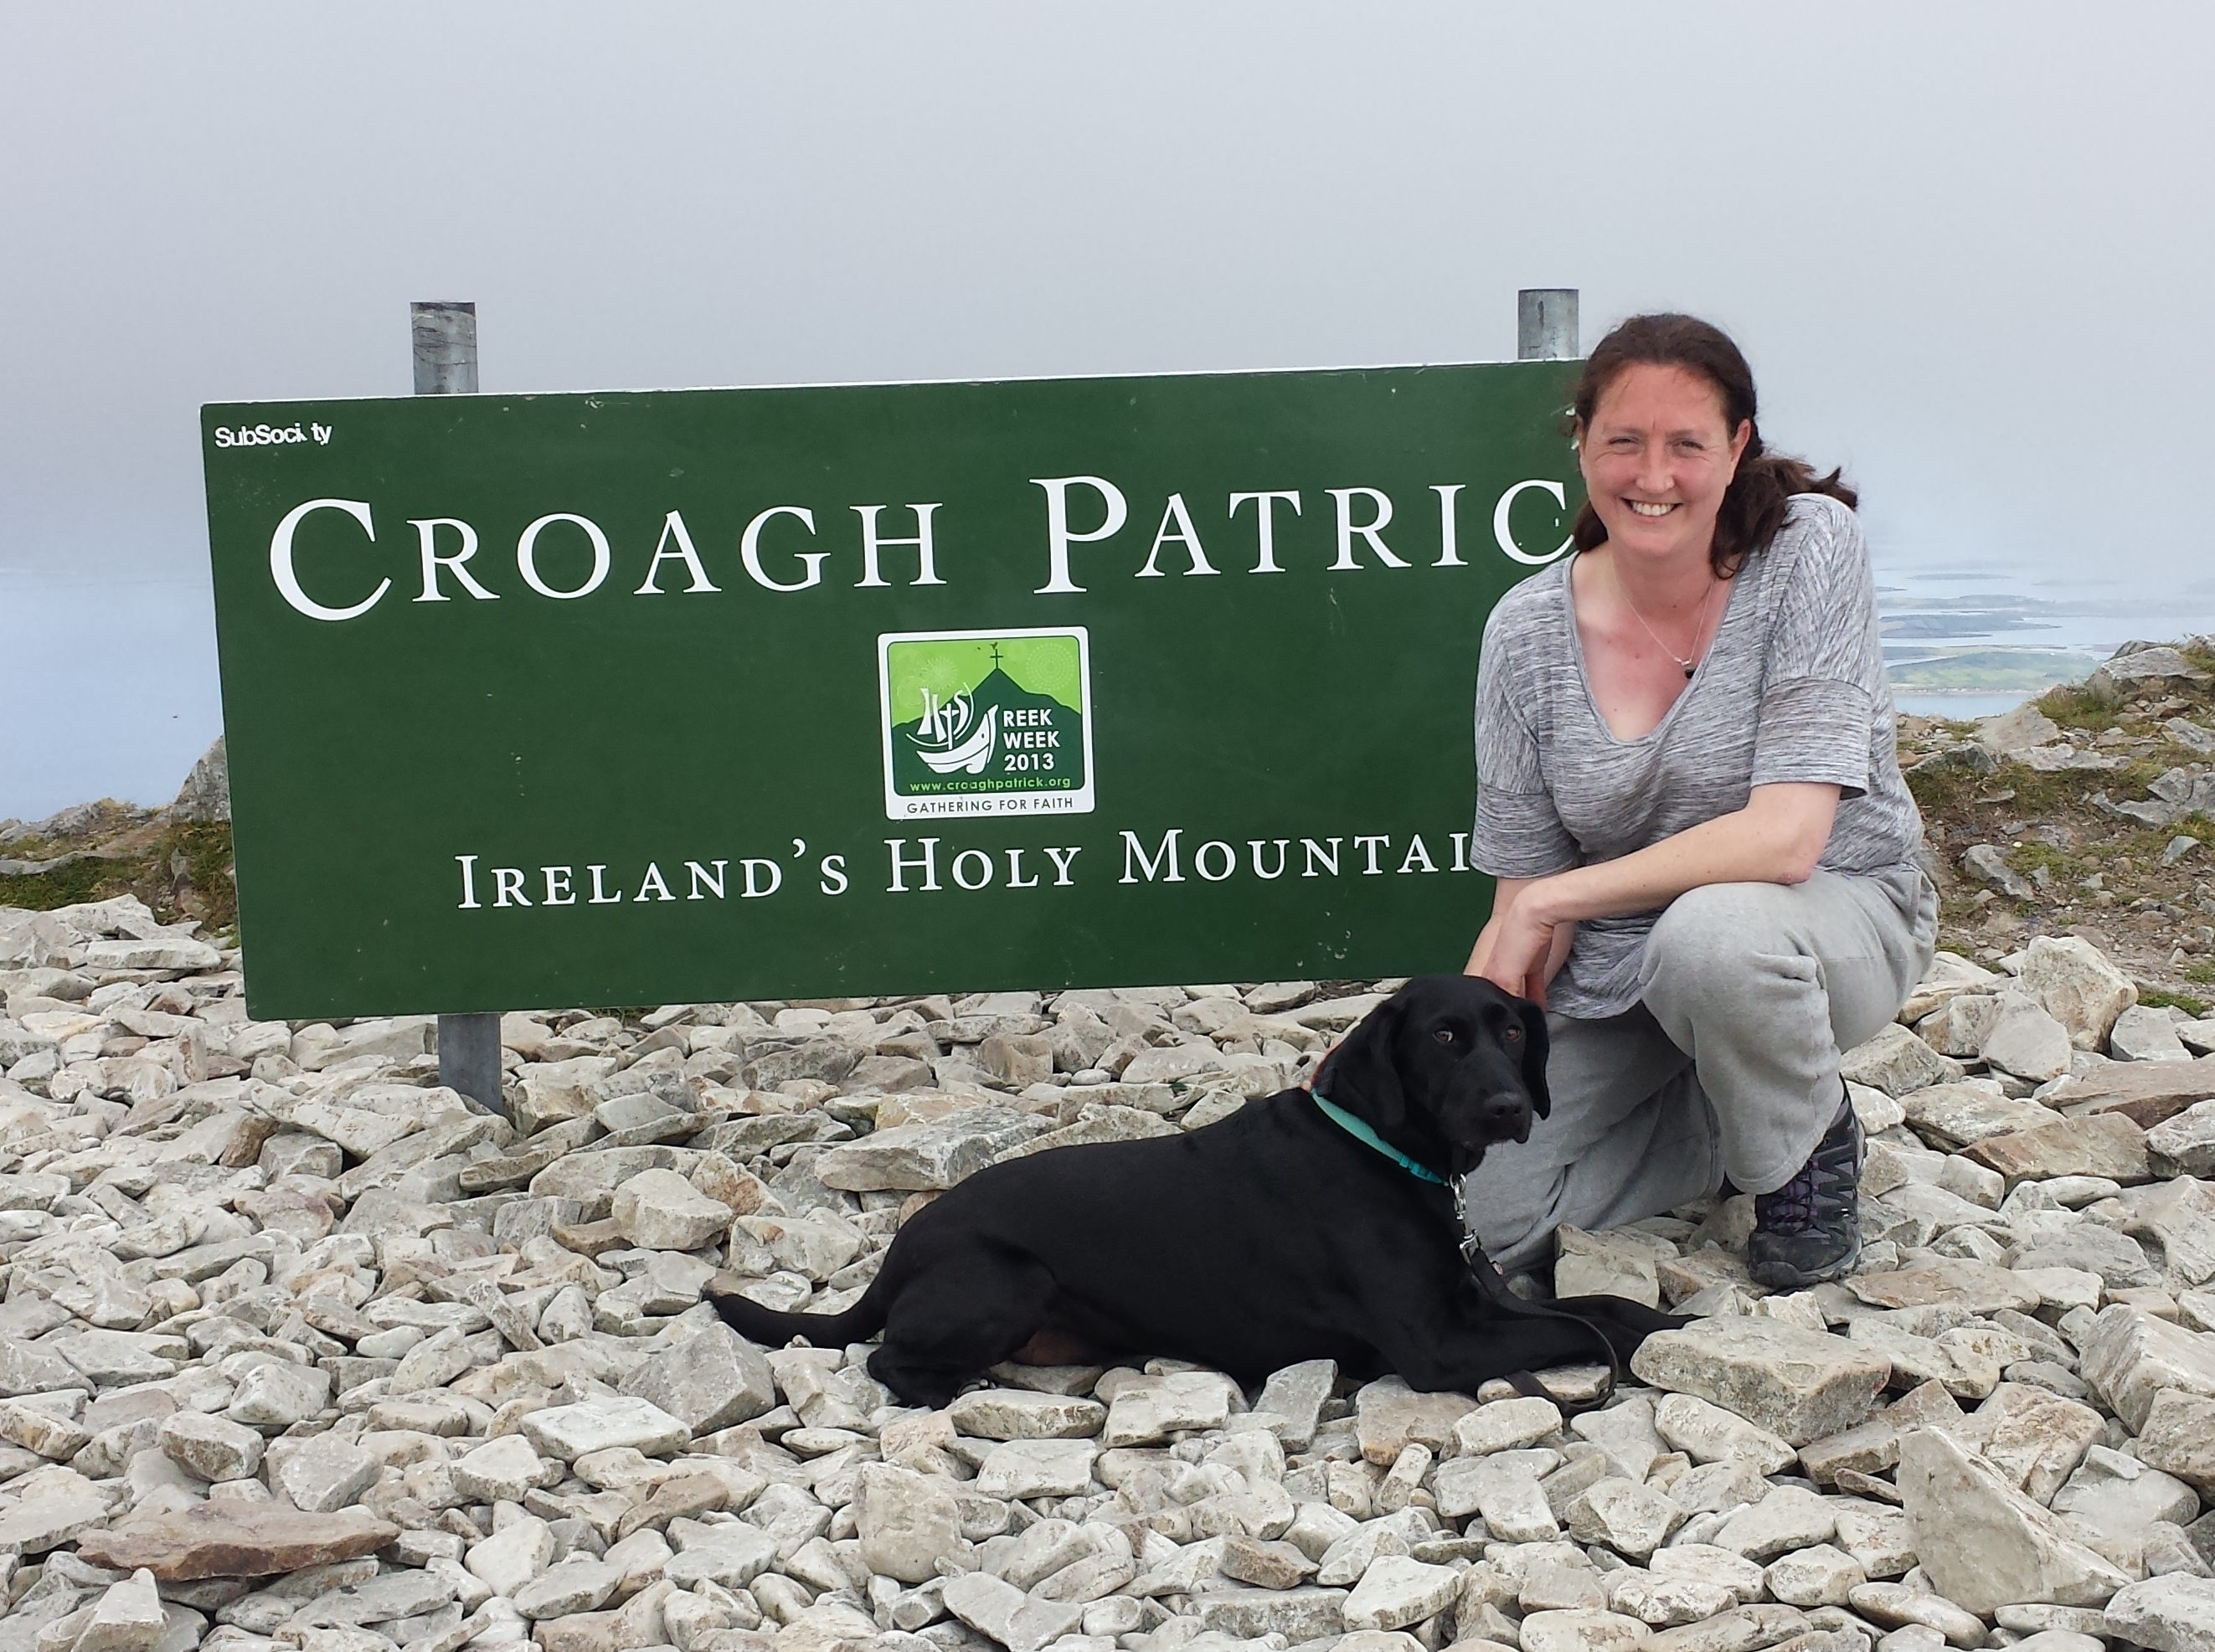 Emma & The Legendary Hanley Hound at the top of Croagh Patrick 8th July 2017 raising money for The Irish Cancer Society.